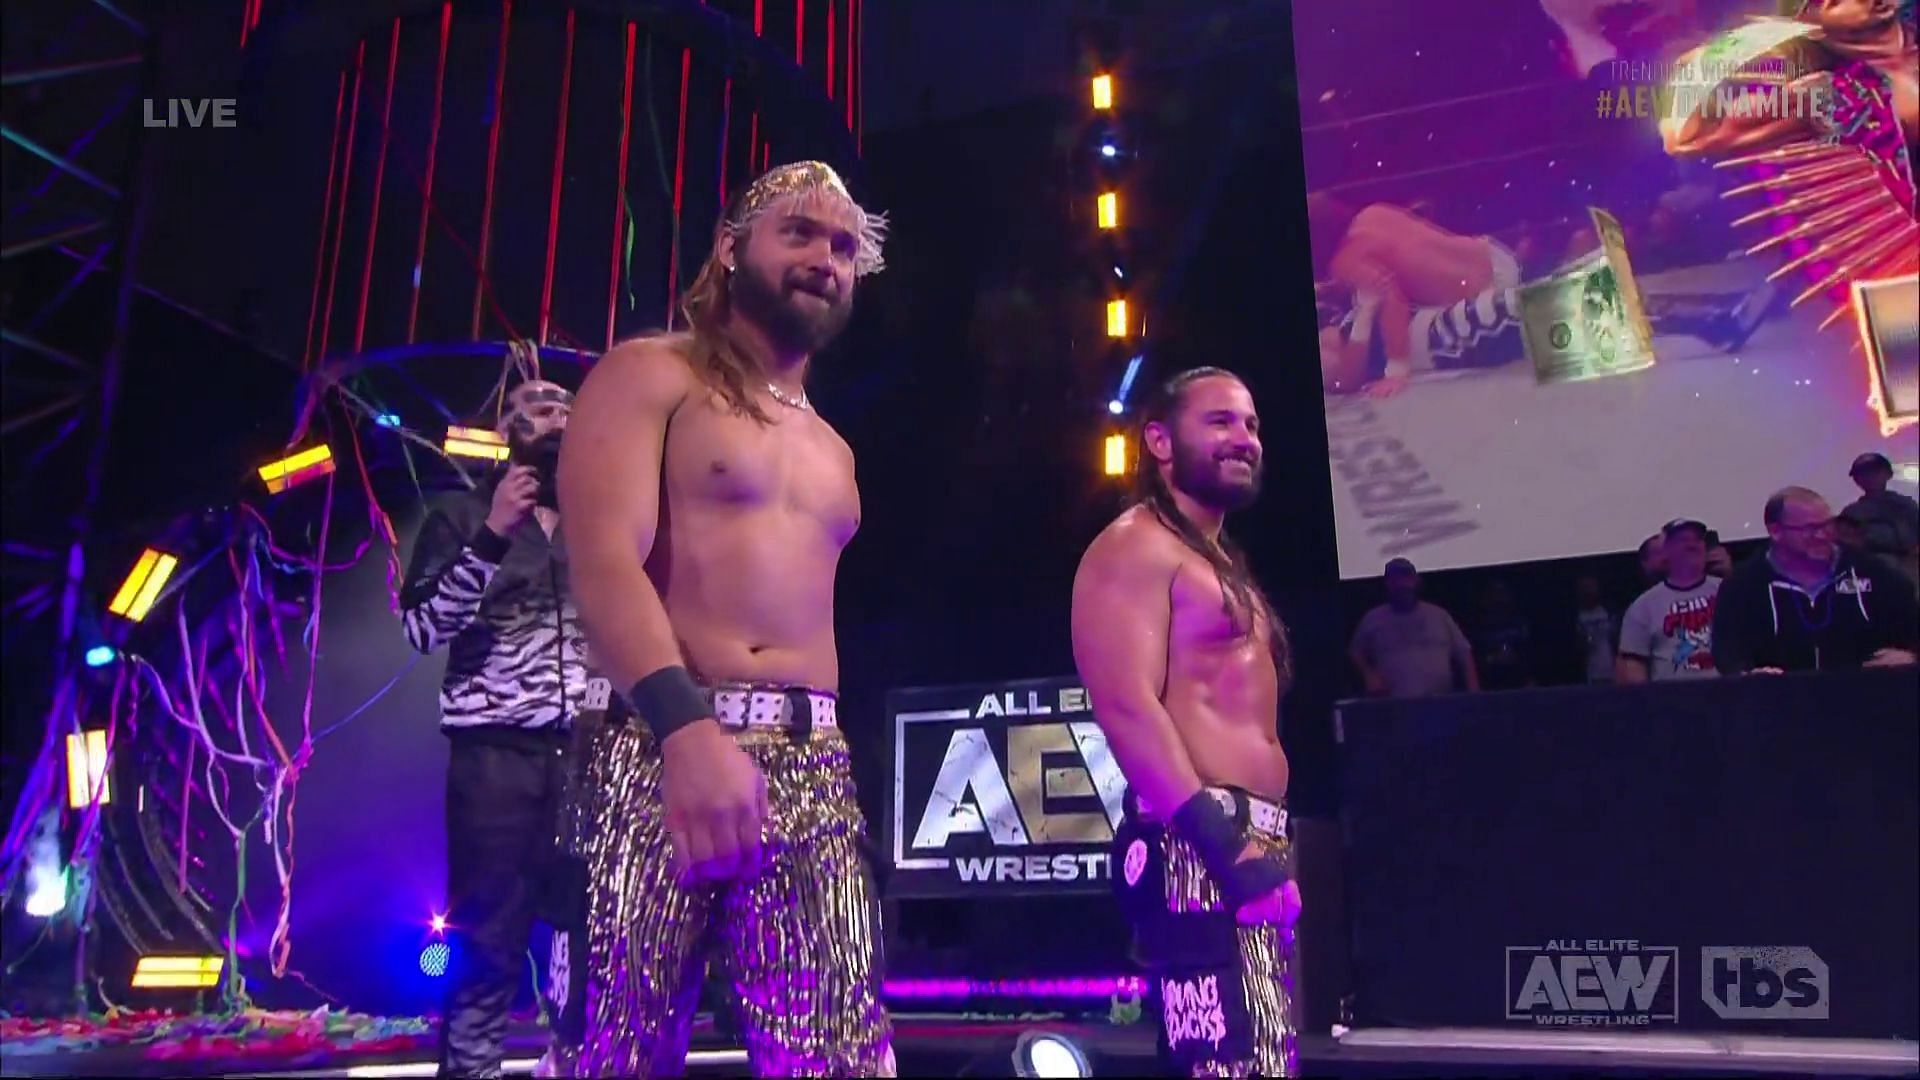 The Young Bucks making their way to the ring.